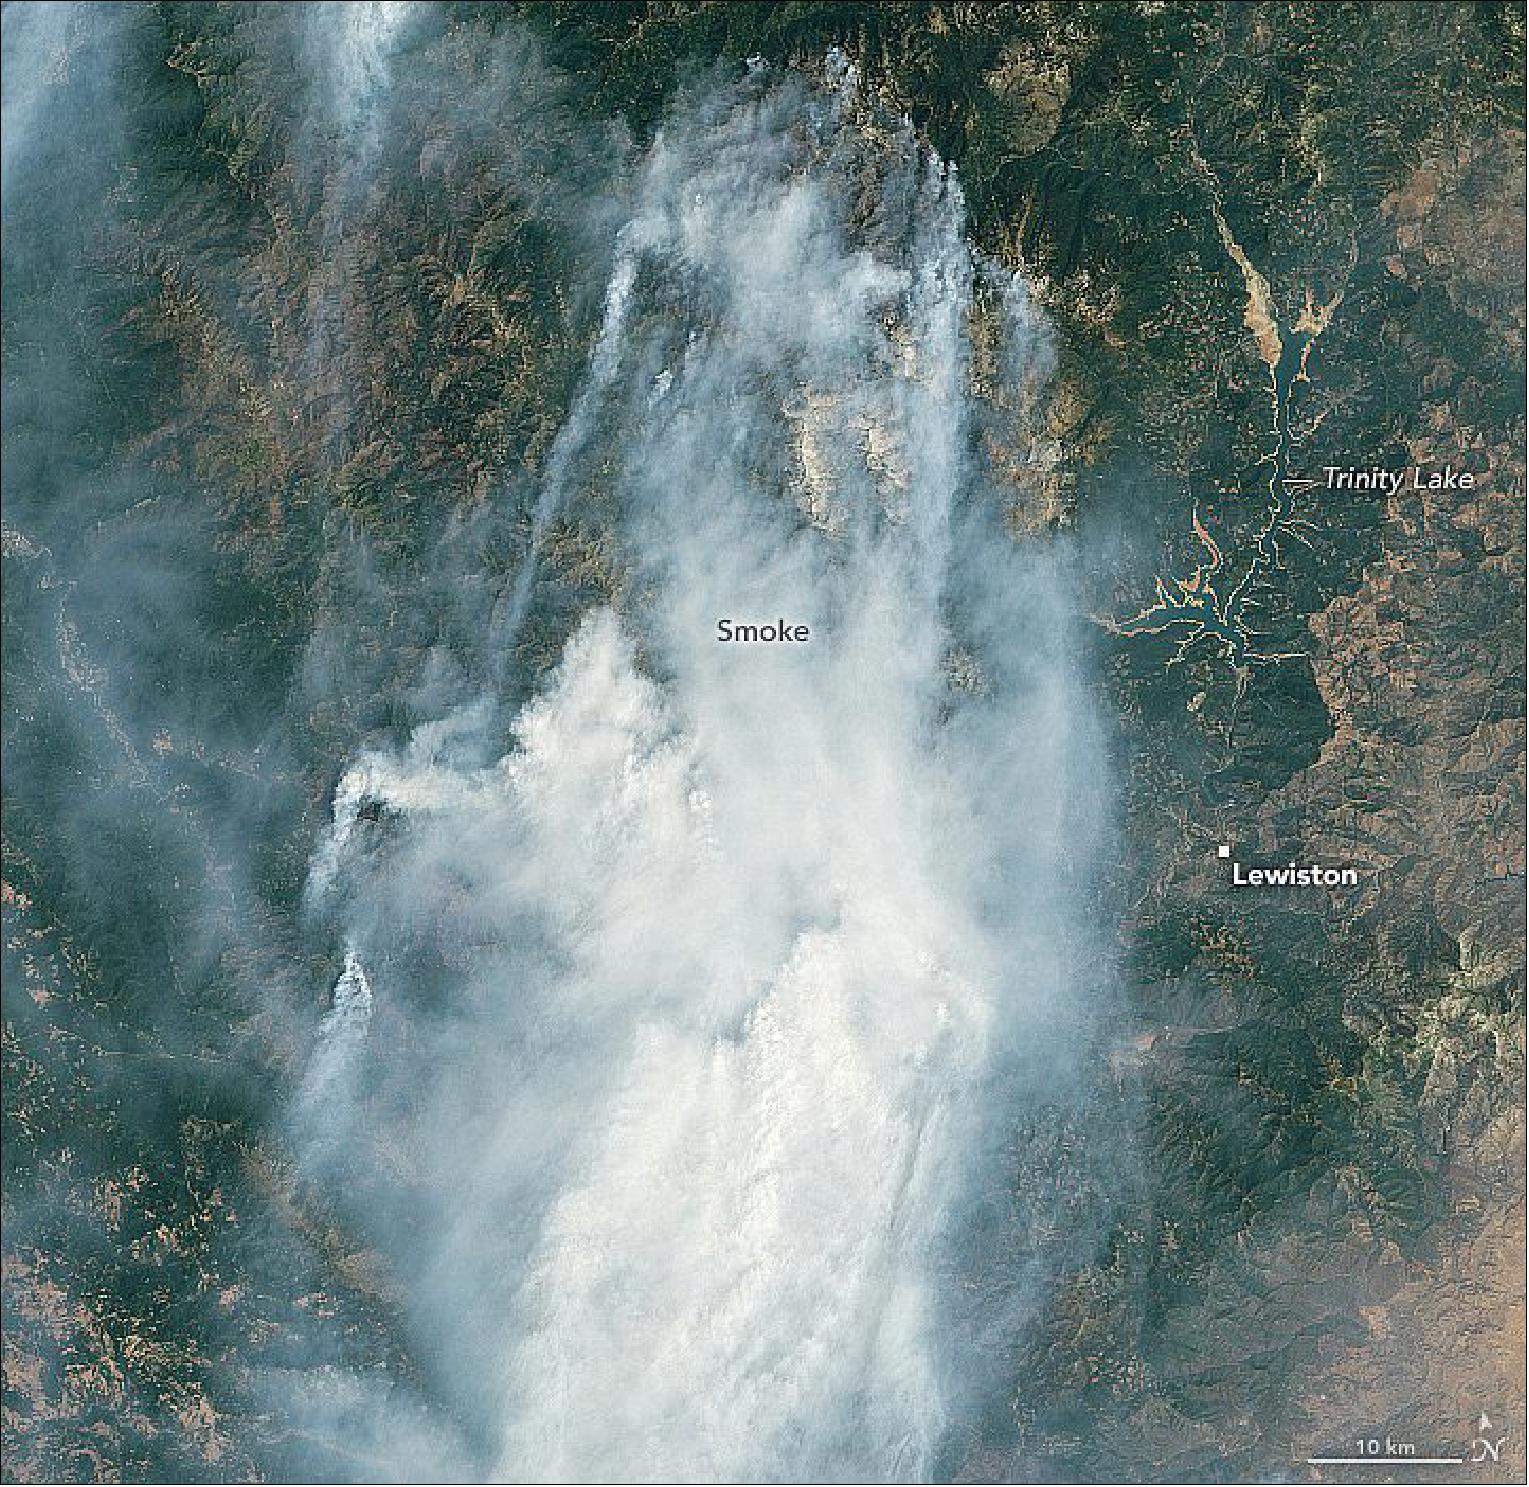 Figure 39: More than 11,000 firefighters are deployed in northern California battling these and several other fires. On August 19, the Operational Land Imager (OLI) on Landsat-8 acquired a closer view of two blazes—the Monument and McFarland fires, the second- and third-largest fires currently burning in California. The McFarland fire was 52 percent contained on August 20; the Monument fire was 10 percent contained (image credit: NASA Earth Observatory)